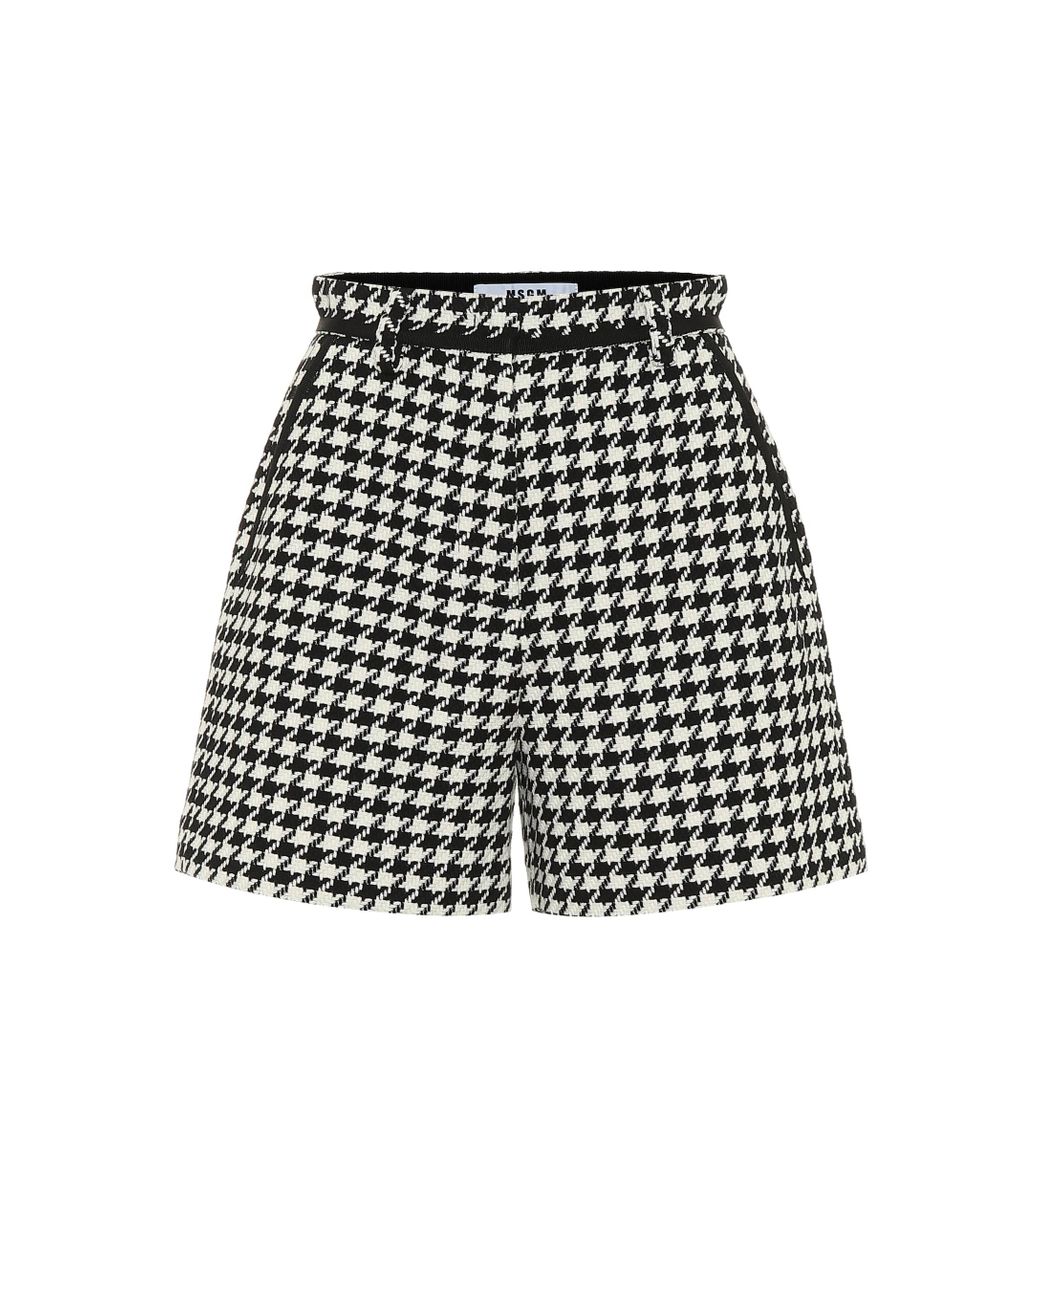 MSGM Synthetic Houndstooth Pattern Shorts in Black/White (Black) - Save ...